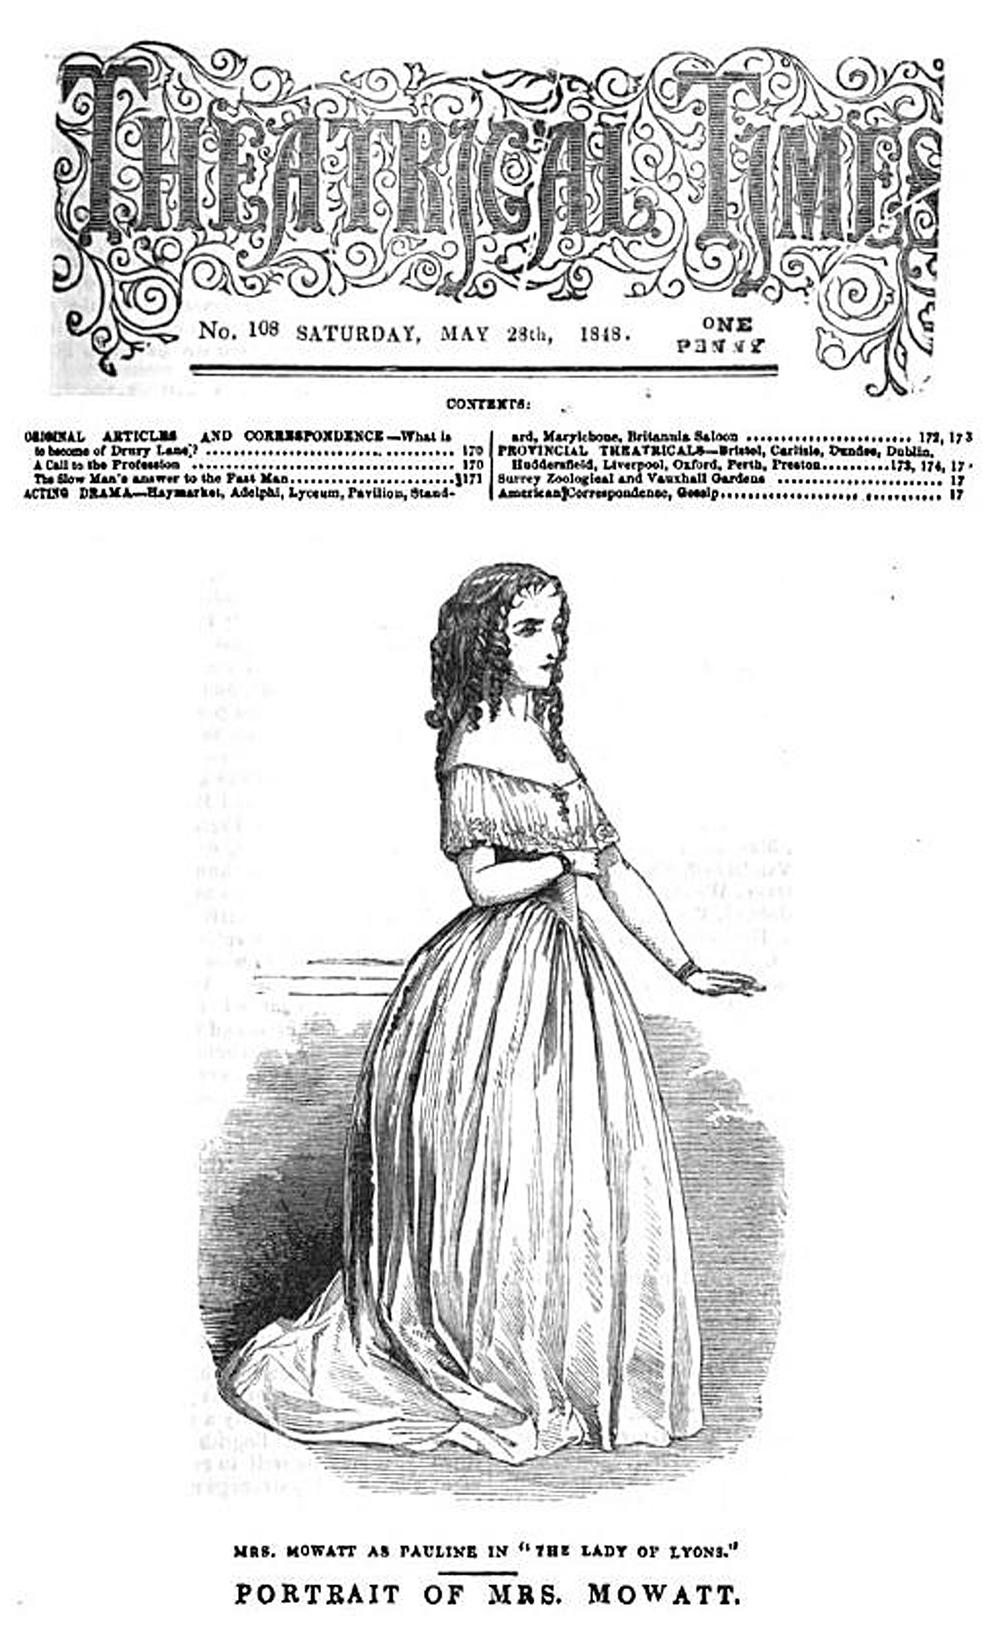 Illustration of Anna Cora Mowatt from The Theatrical Times